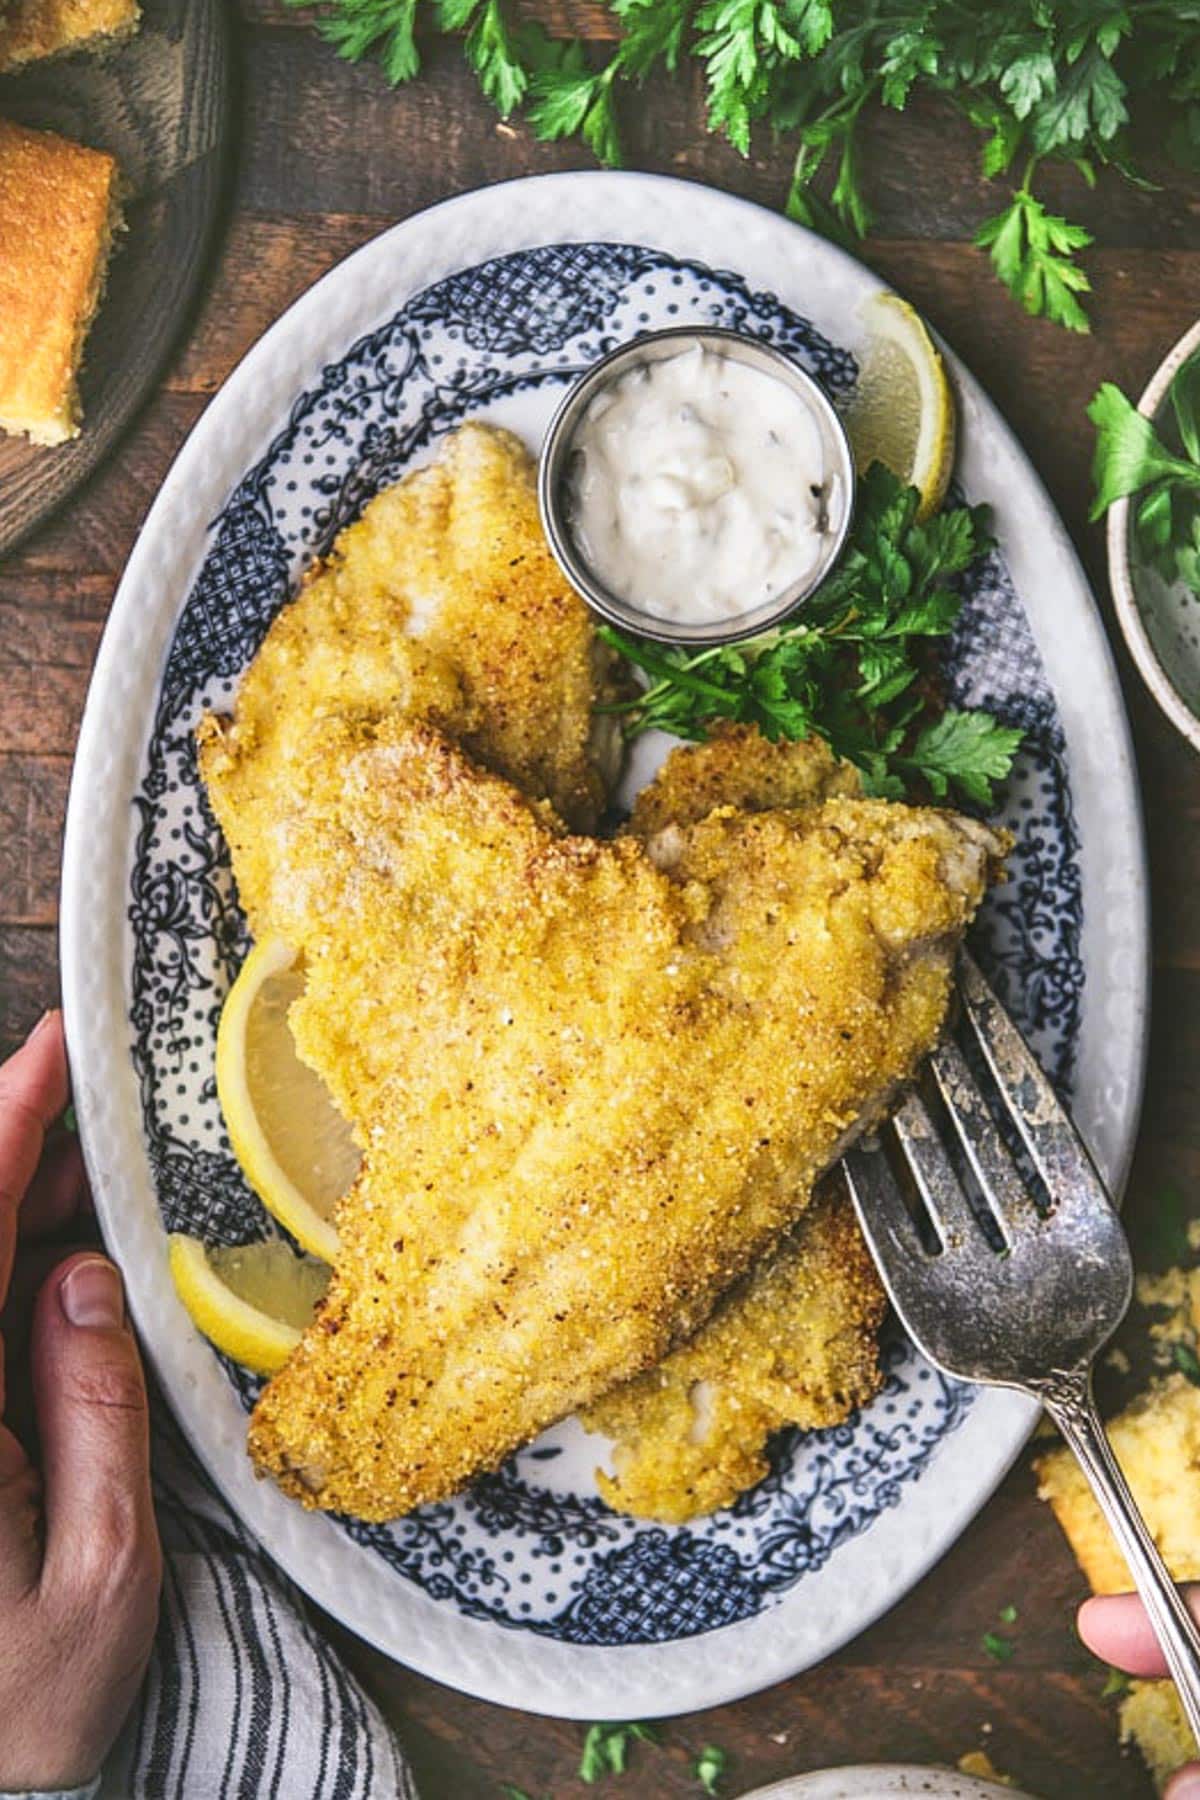 Overhead shot of a blue and white plate with southern fried catfish.